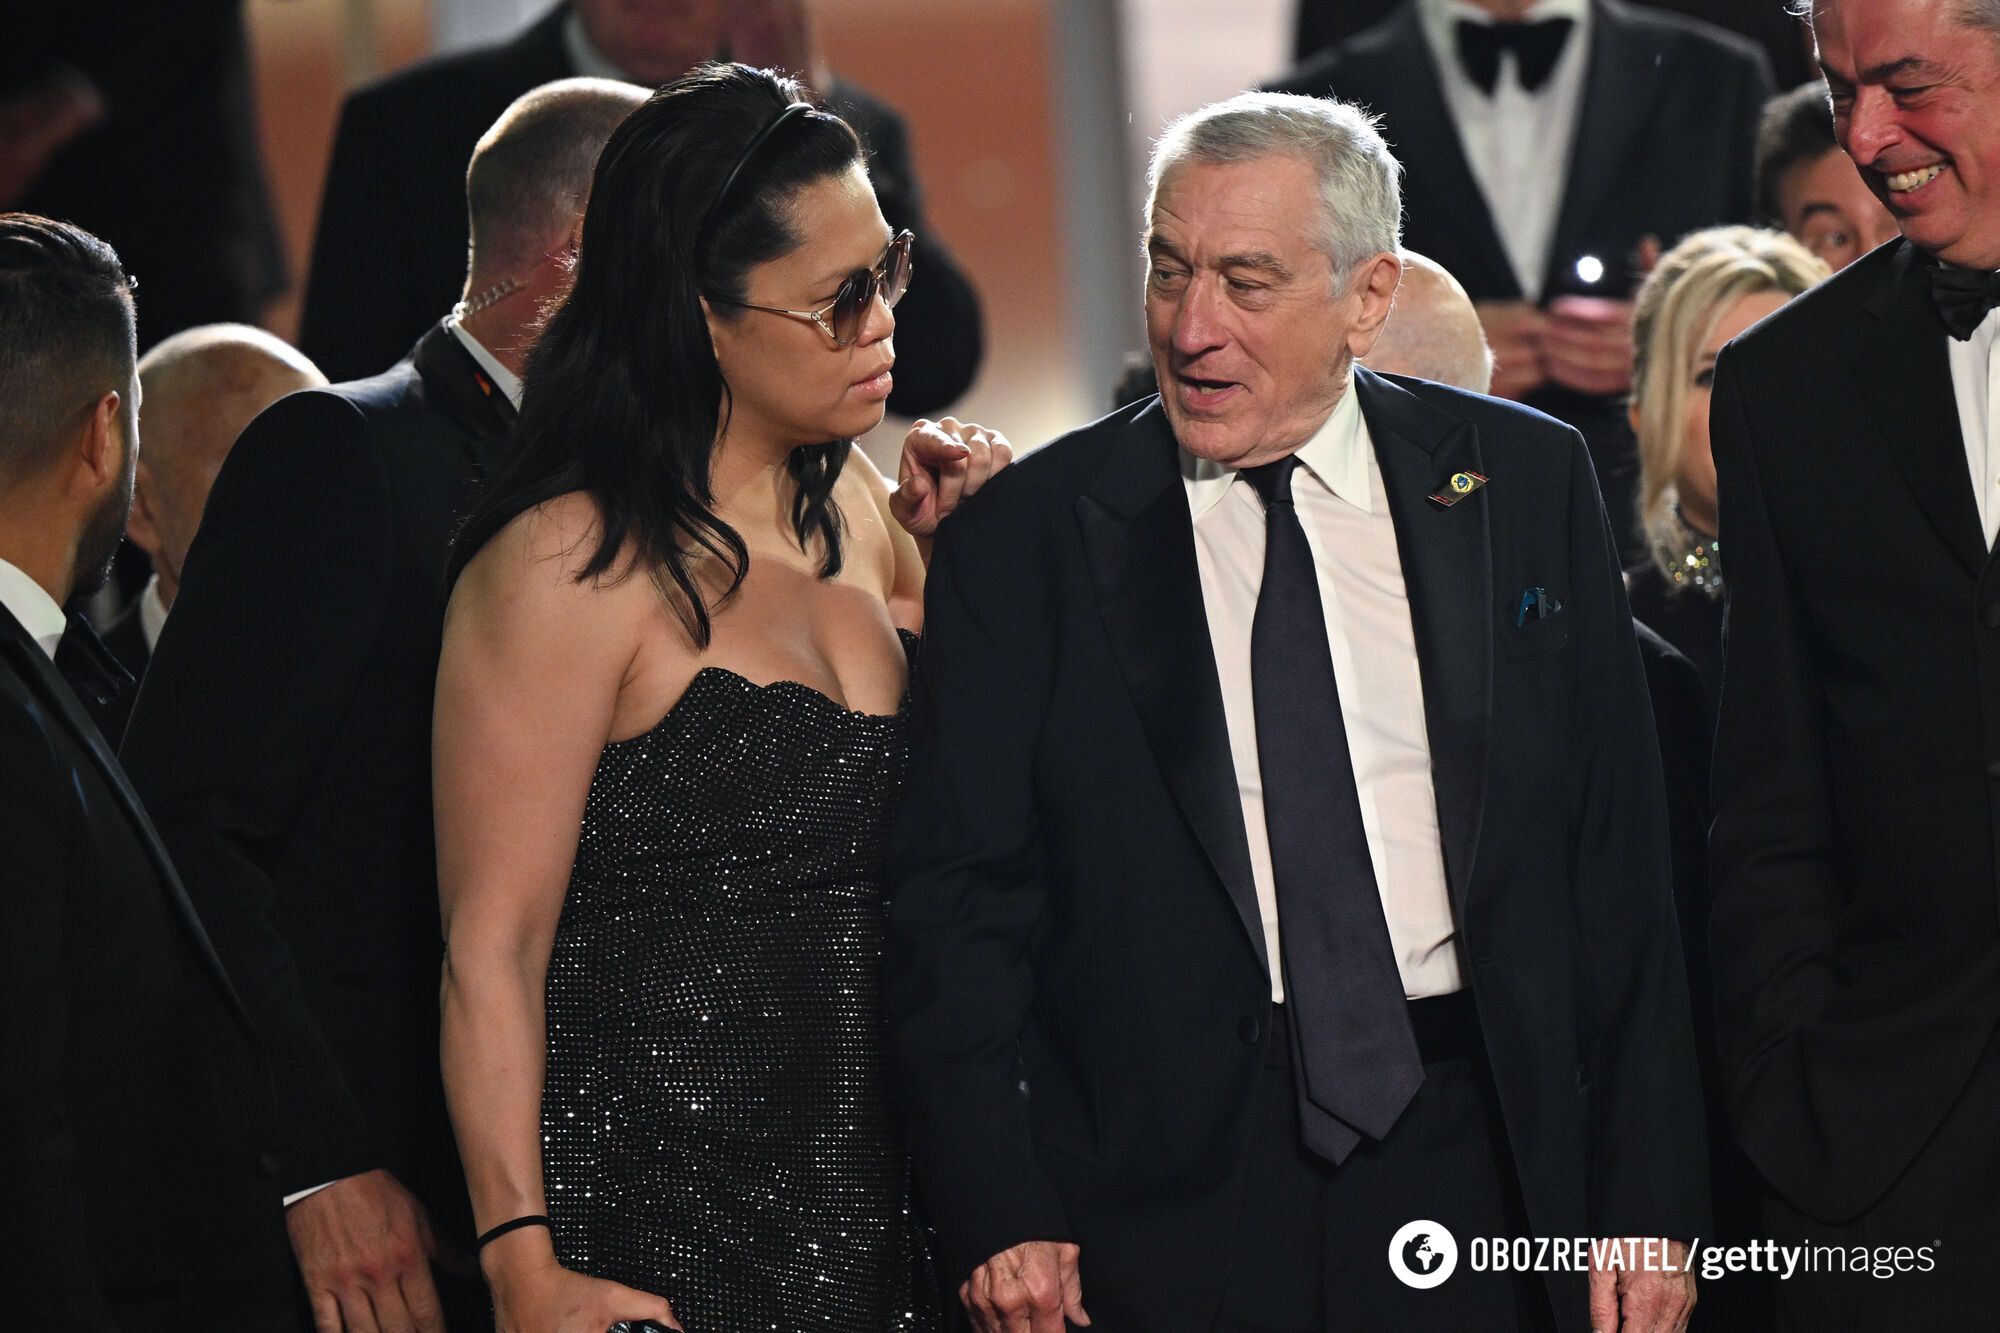 Robert De Niro's 45-year-old girlfriend had her face paralyzed after giving birth: she couldn't eat and started stuttering